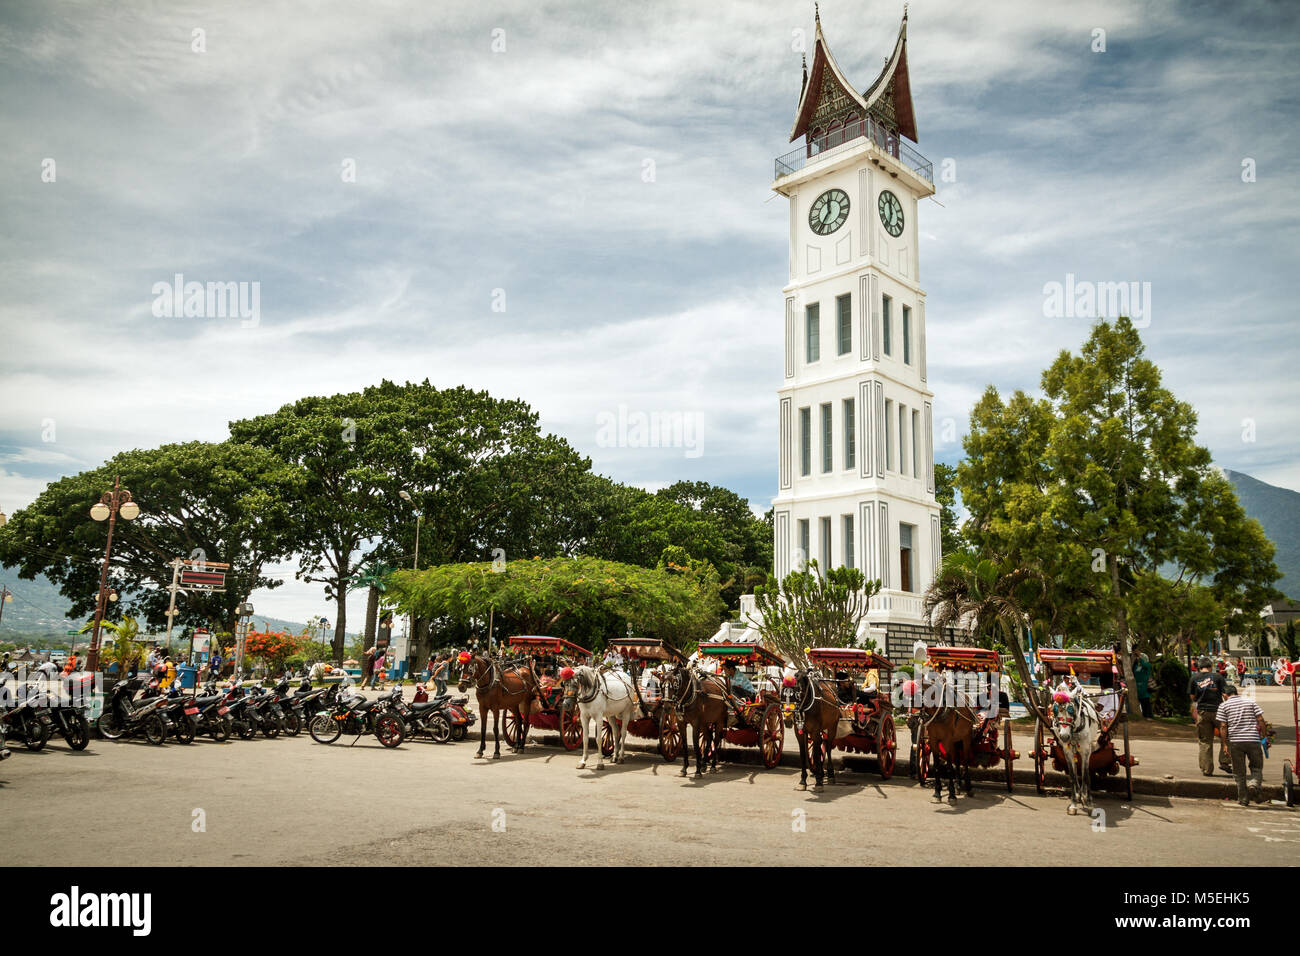 Famous clock tower of Bukittinggi, Jam Gadang in West Sumatra, Indonesia. Horse and carriages await below at this impressive tourist attraction Stock Photo